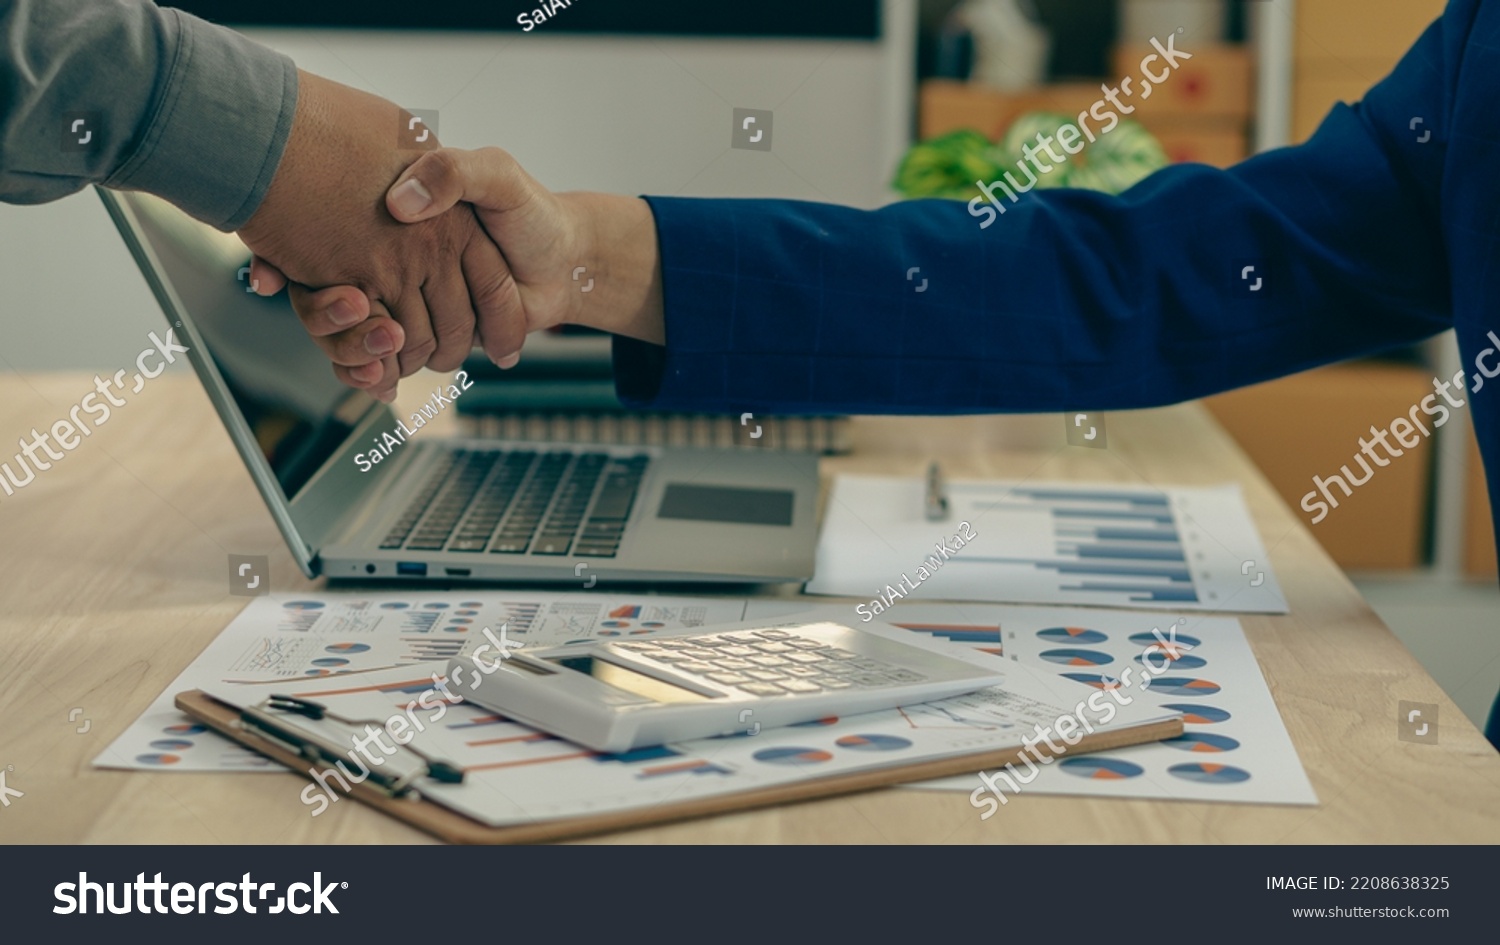 business people shake hands to make an agreement during a board meeting in the office Teamwork, agreement, cooperation, real estate business concept. #2208638325